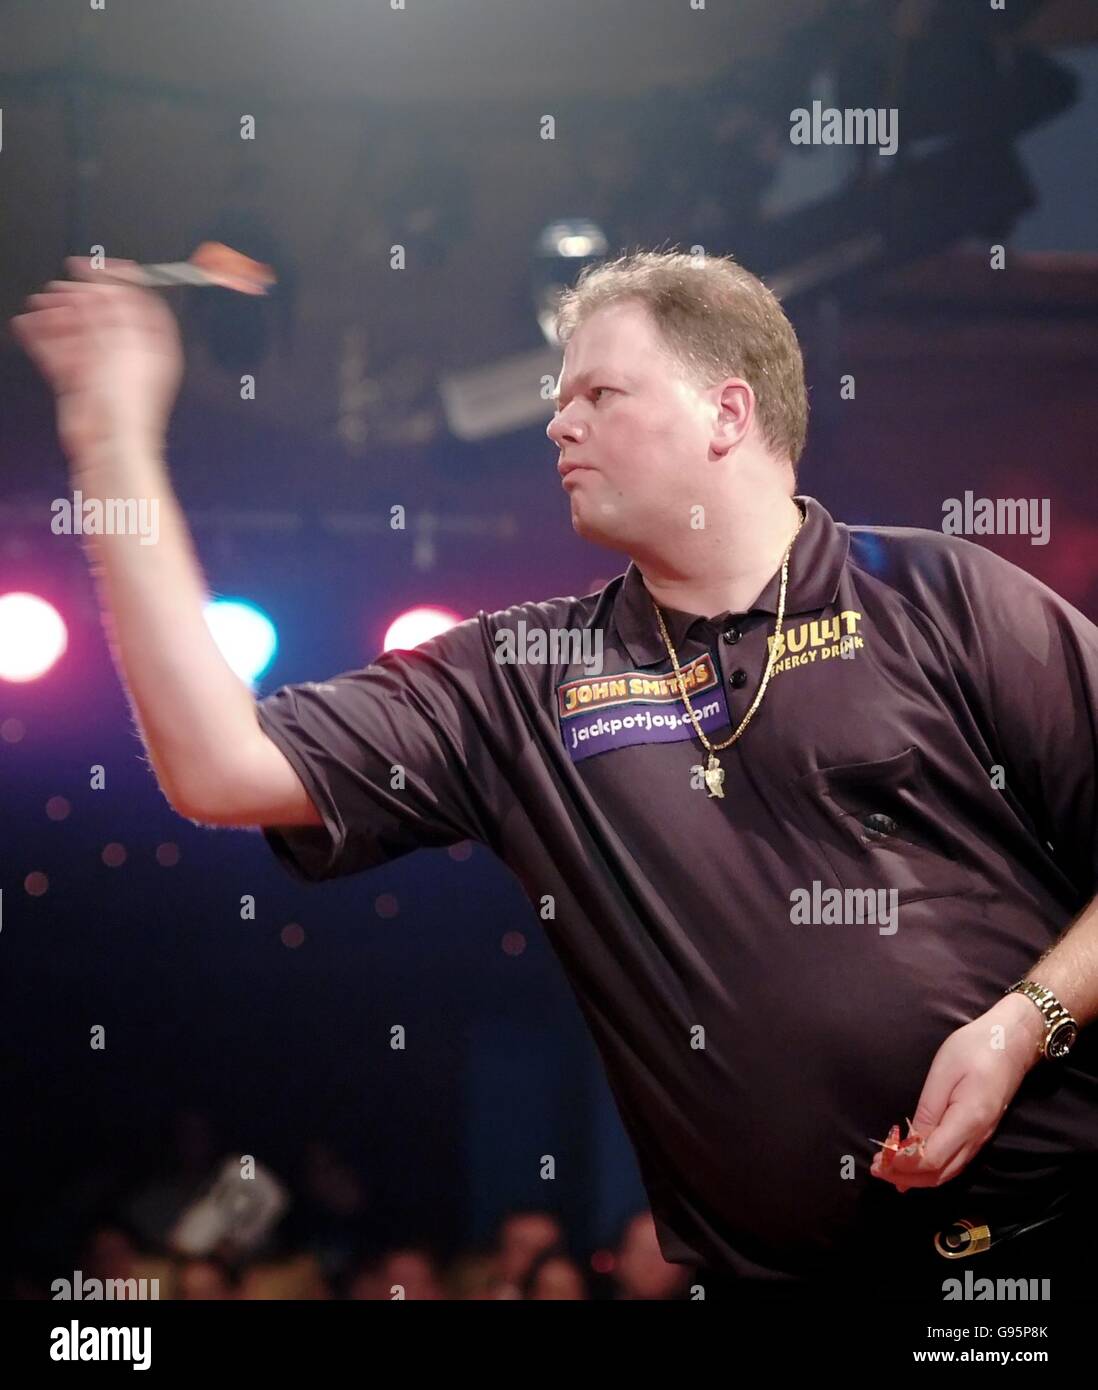 Raymond Barneveld of the Netherlands, during his semi-final match against England's Martin Adams, in the World Professional Men's Darts Championship at The Lakeside, Frimley Green, England. Stock Photo